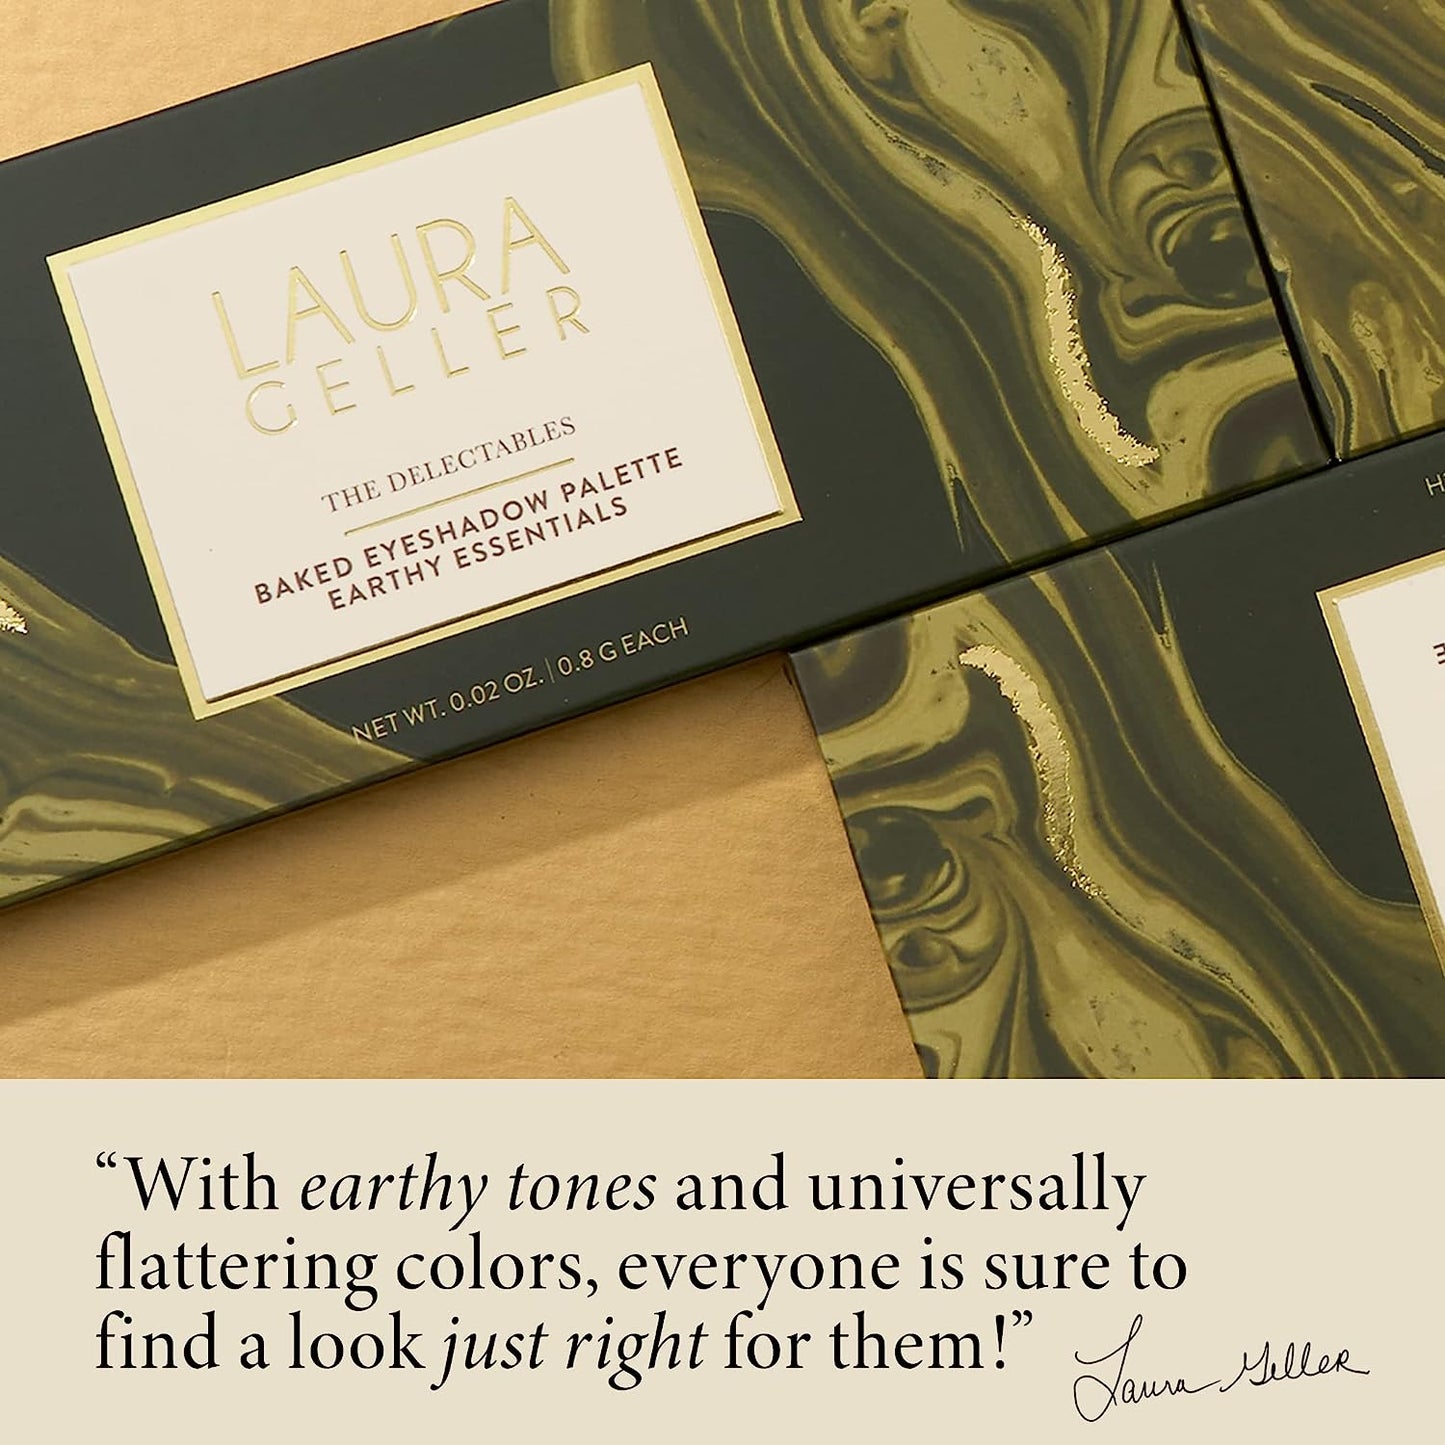 LAURA GELLER NEW YORK The Delectables Earthy Essentials Baked Eyeshadow Palette: 14 Pigmented Shades for a Blendable, Natural Look